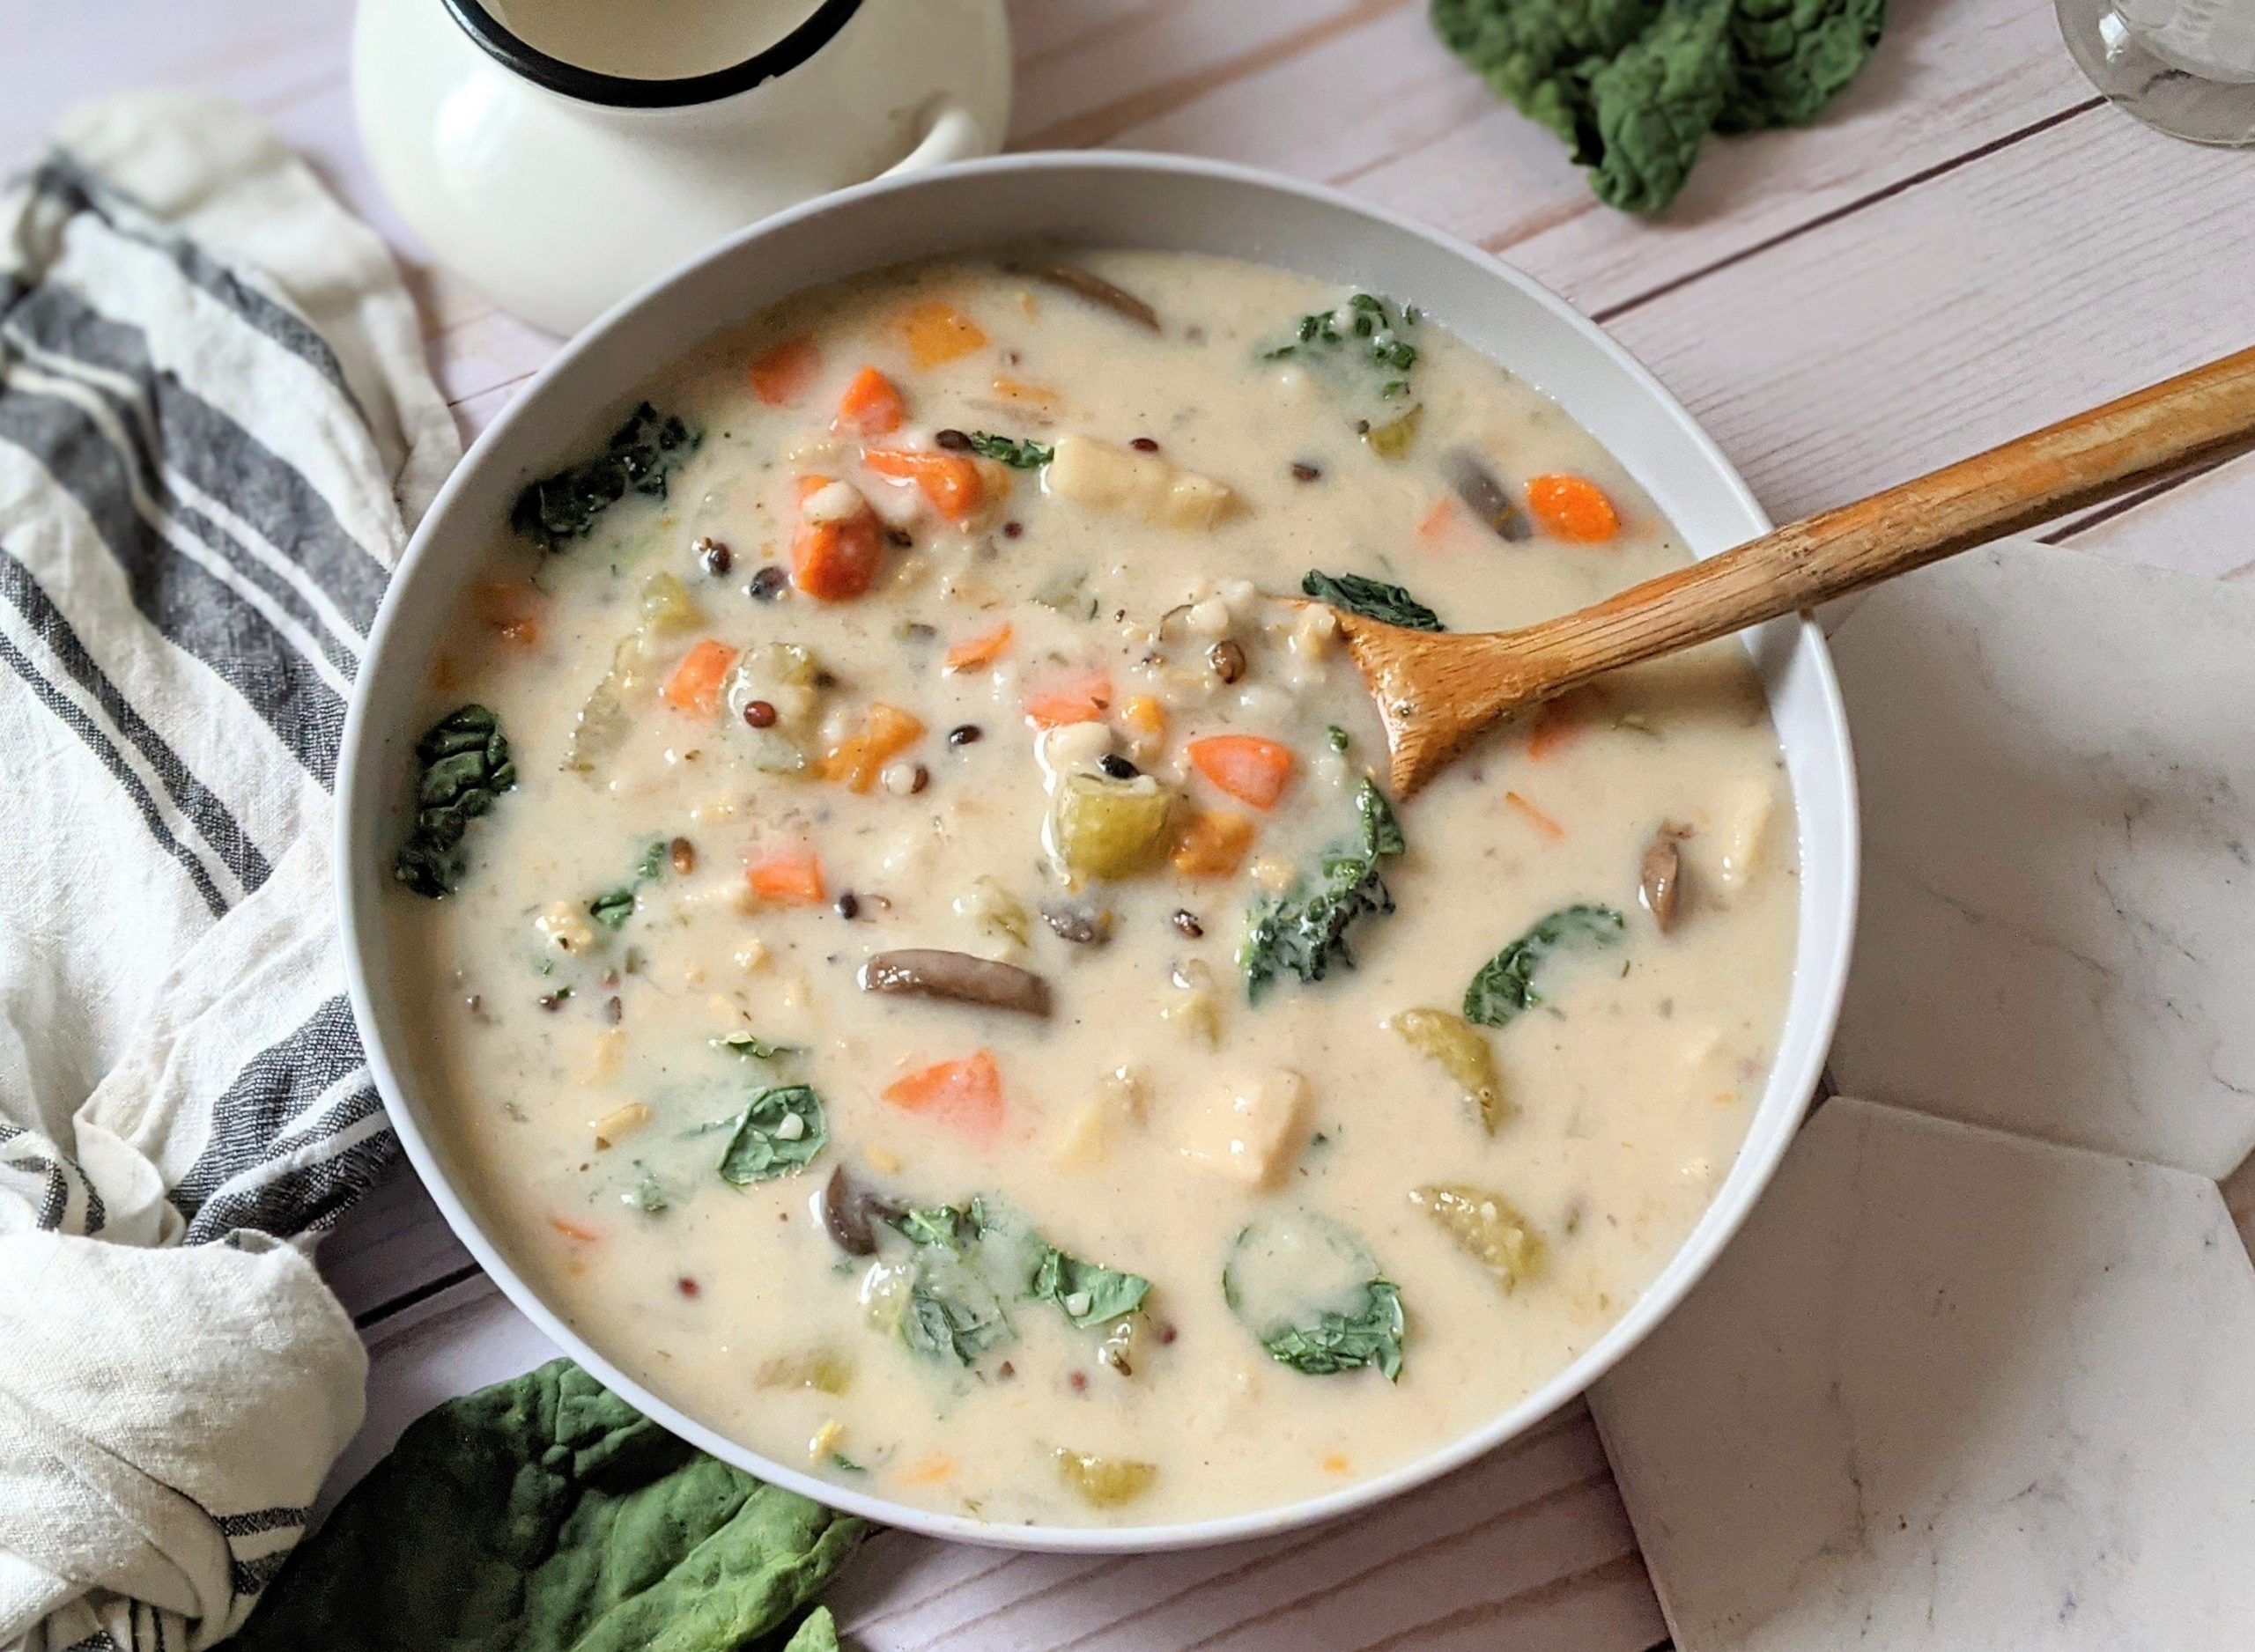 creamy mushroom rice soup recipe vegan dairy free vegan gluten free soups with coconut milk and wild rice blend from trader joes